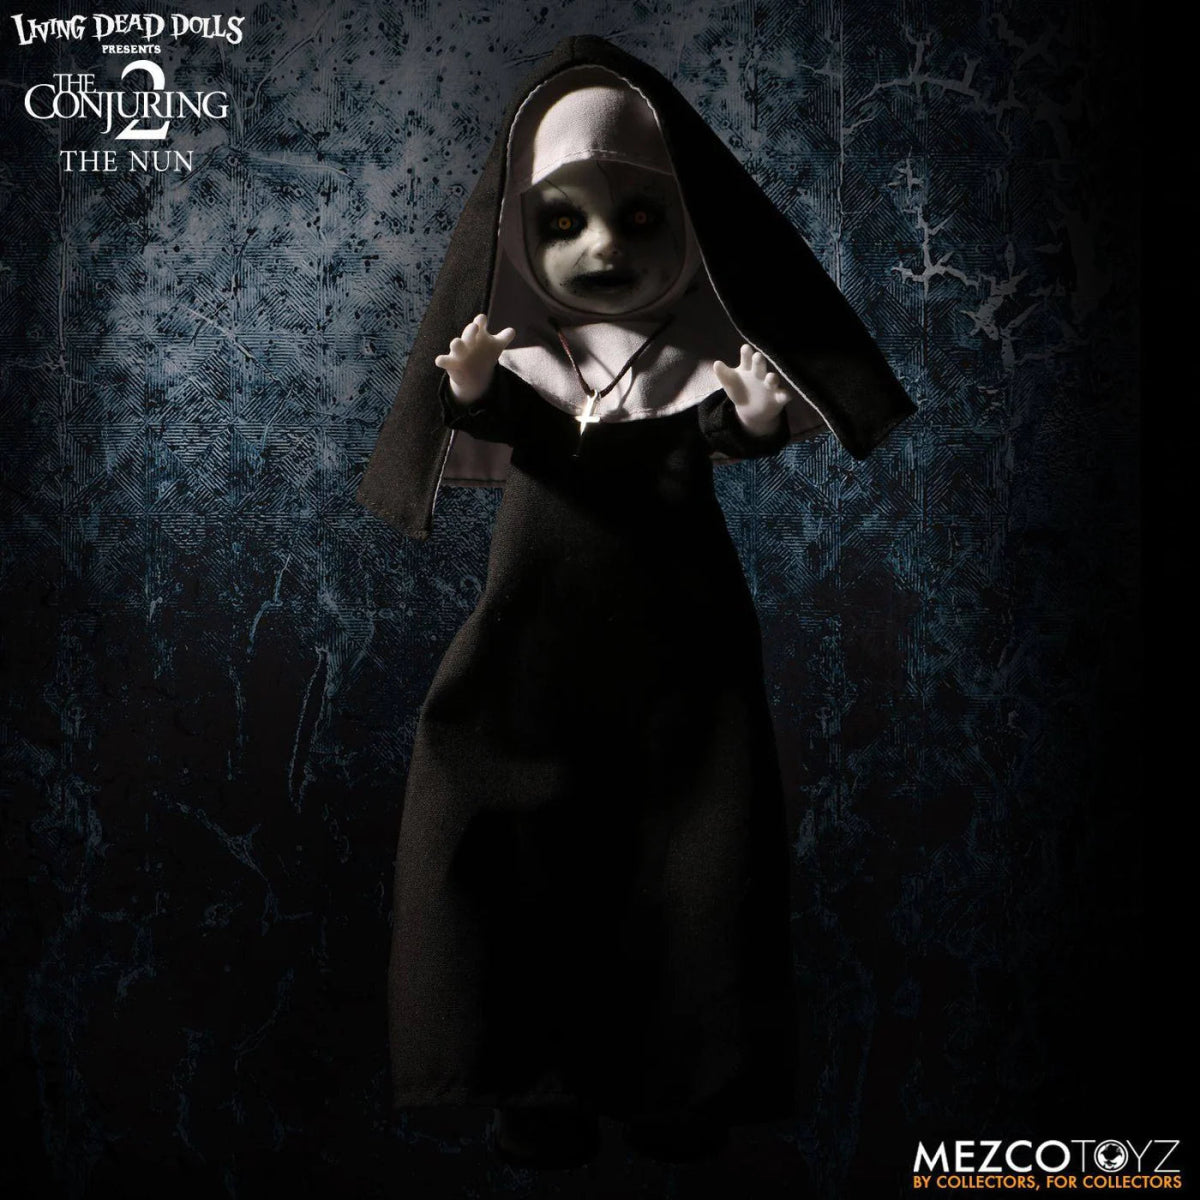 Living Dead Dolls The Conjuring 2 The Nun Doll - Simon's Collectibles